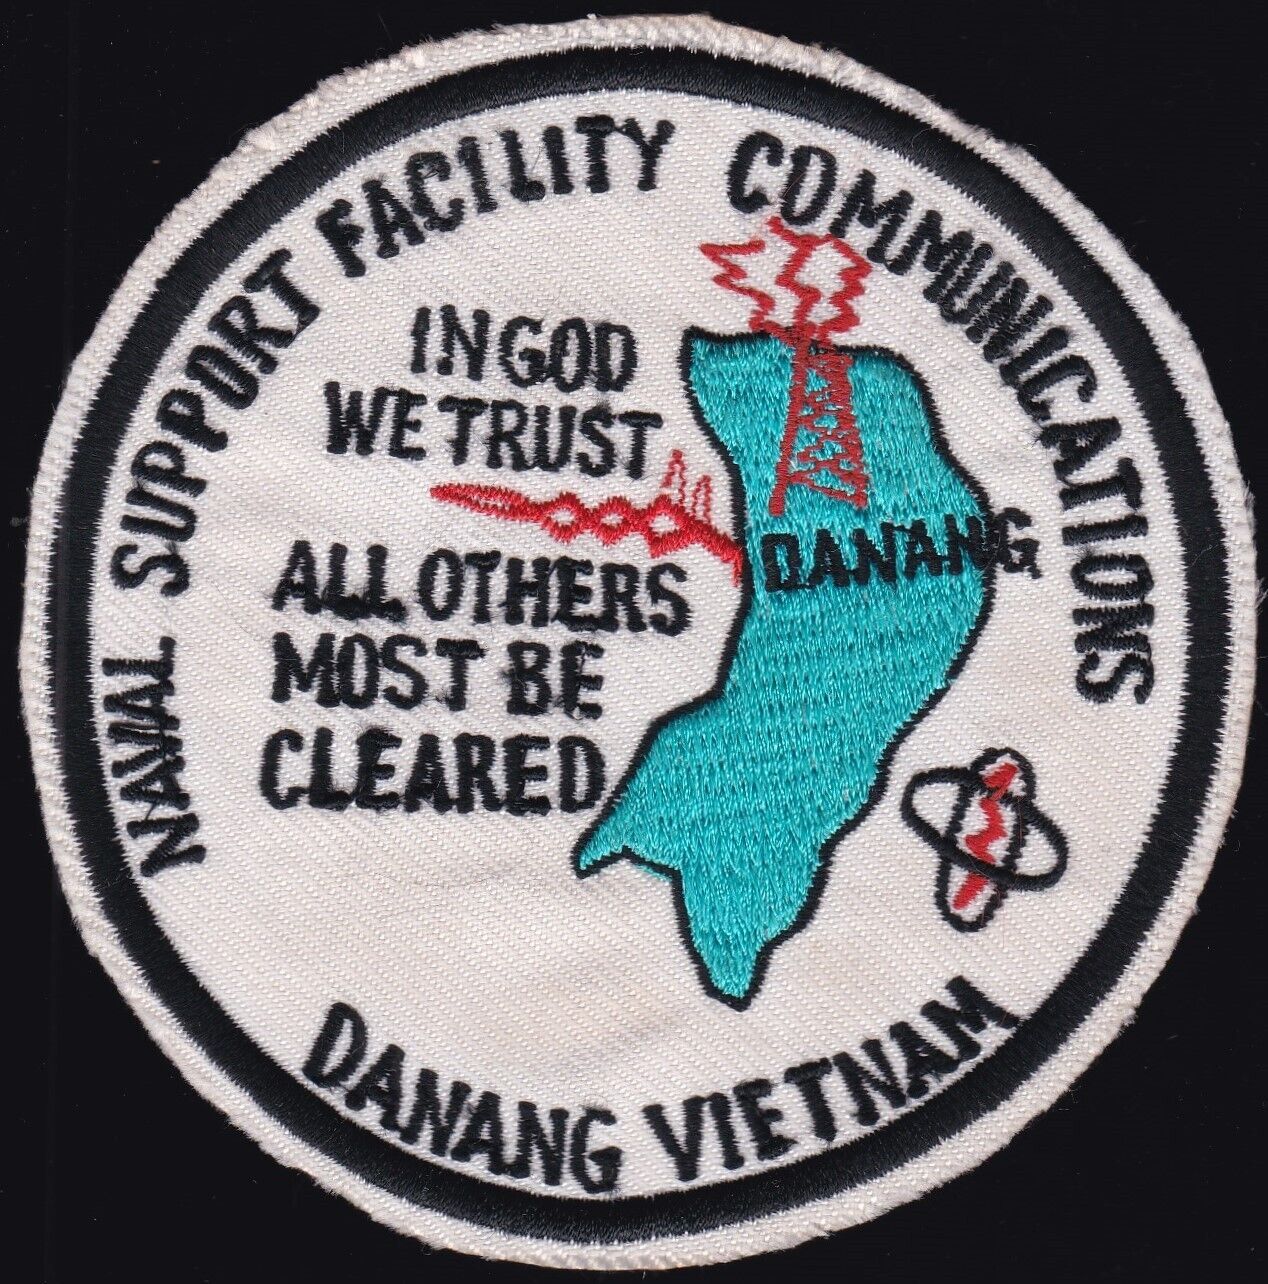 USN Naval Support Facility Communications Danang Vietnam Patch N-7